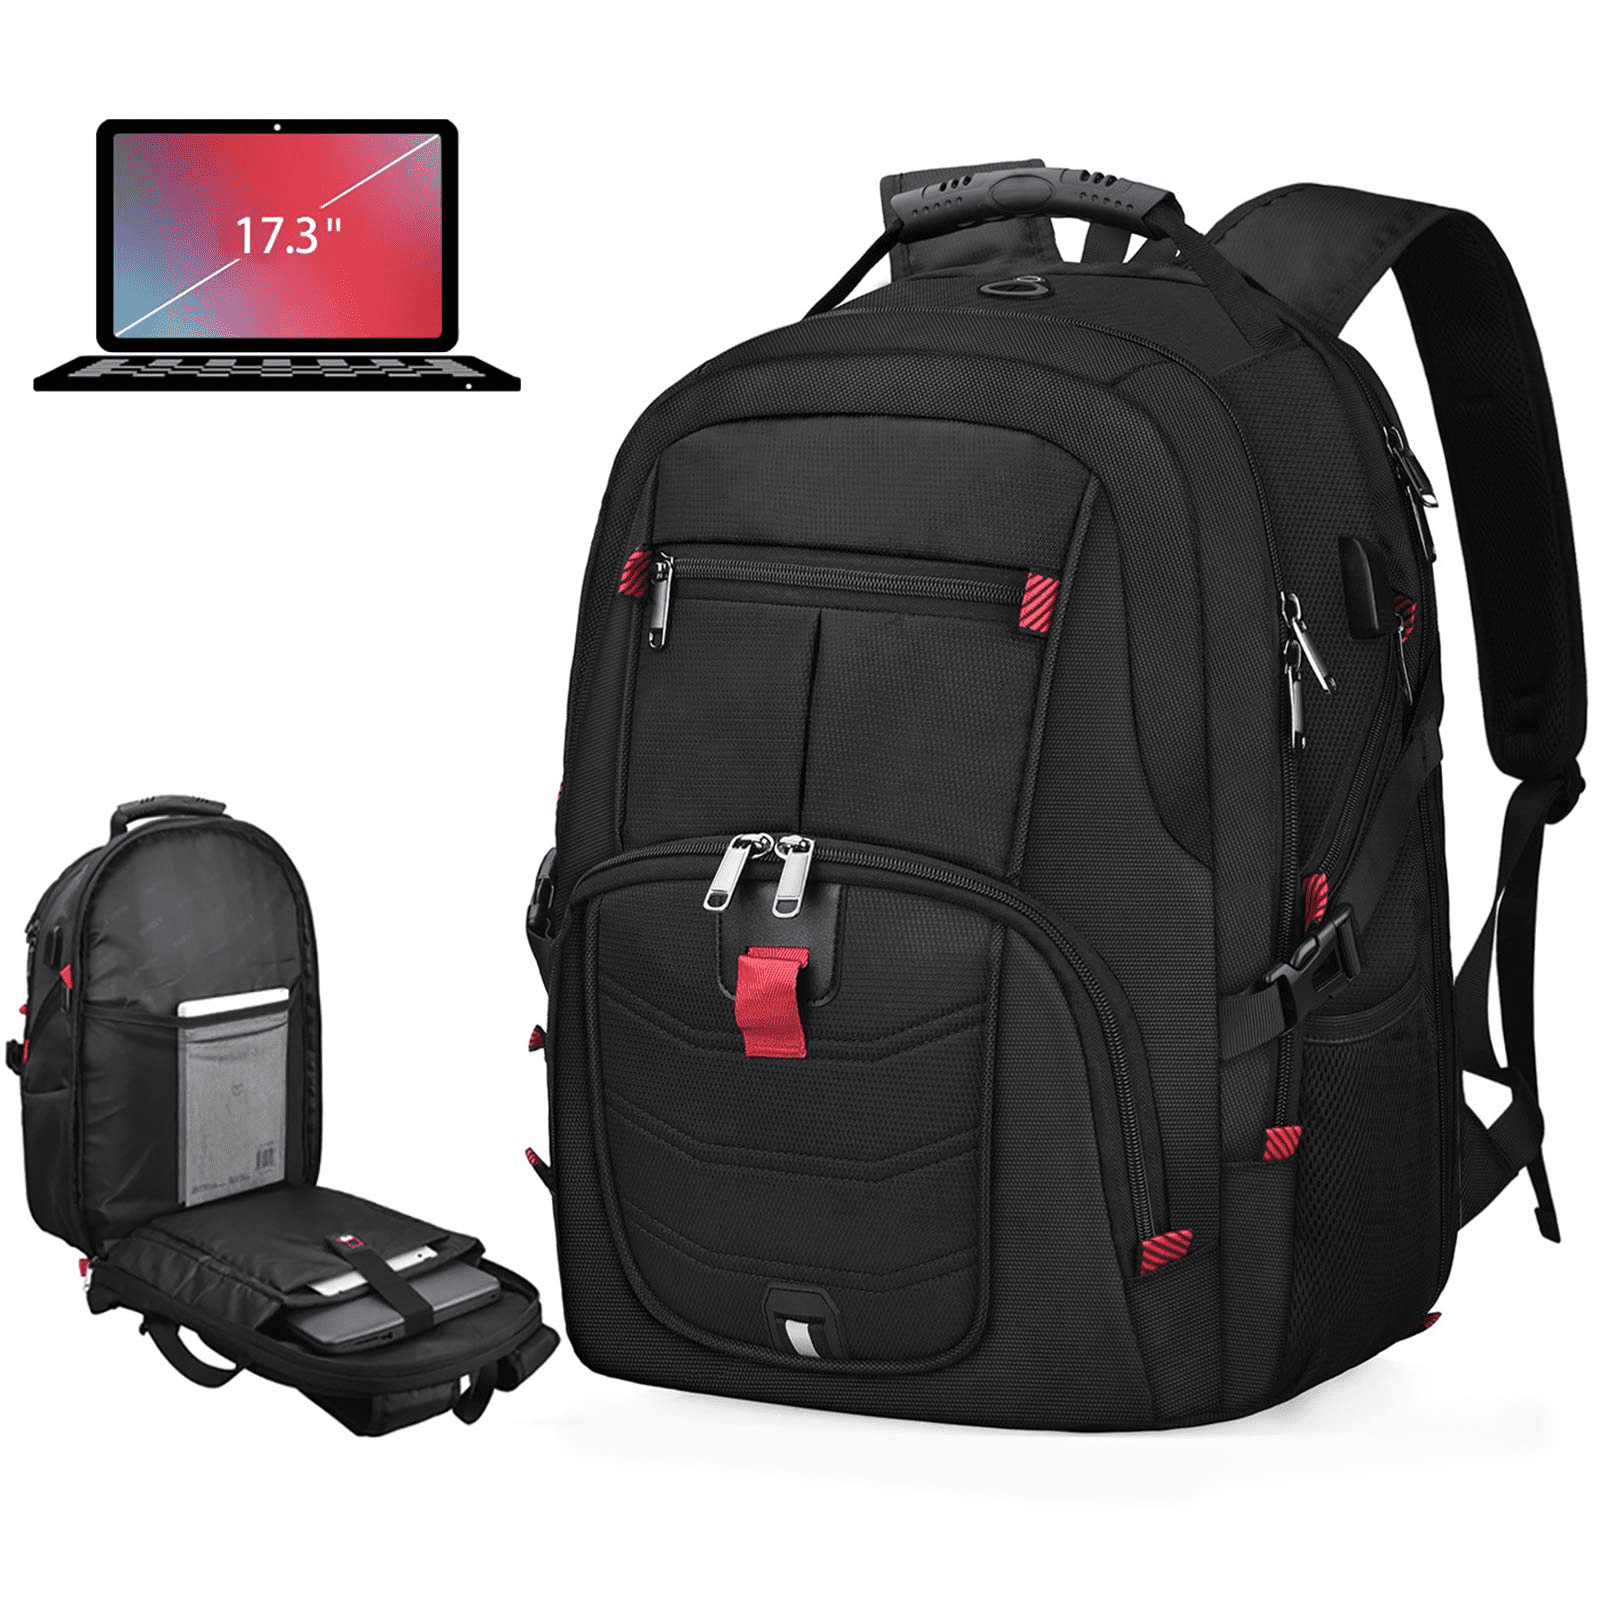 YOREPEK Extra Large Backpack,TSA Laptop Backpacks with USB Charging Port/Headphones Hole,Water Resistant Big Business College School Bookbag Computer Backpack for Women & Men Fits 17 Inch Laptop 